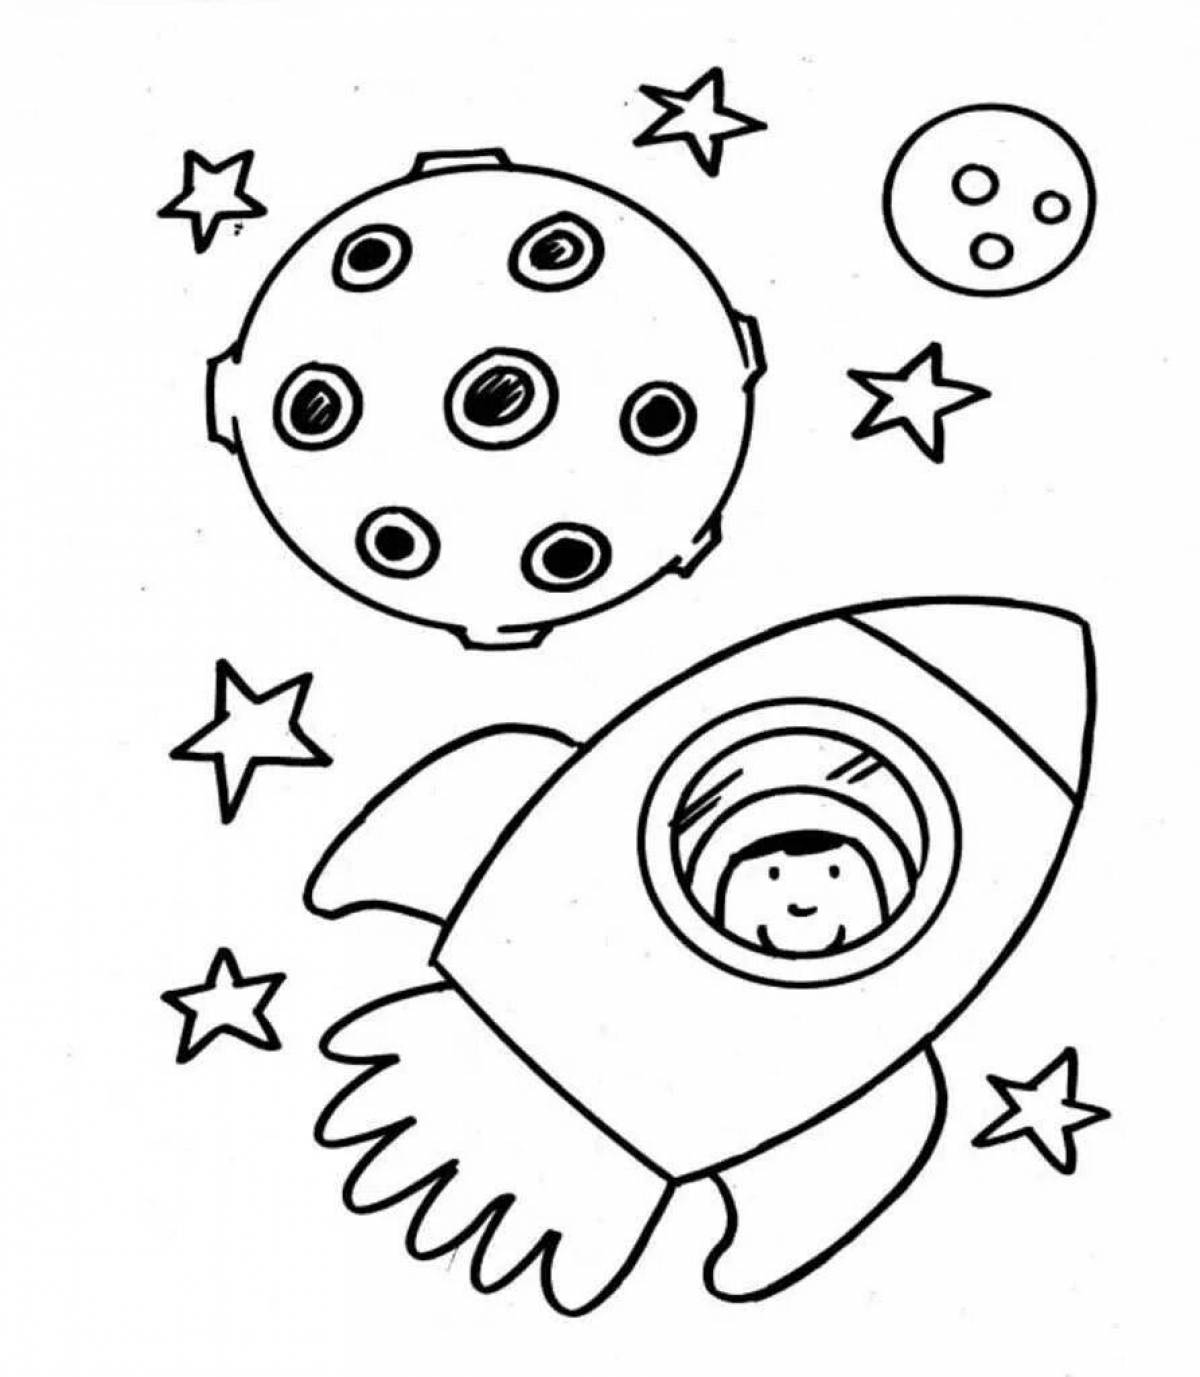 Amazing space coloring book for 4-5 year olds